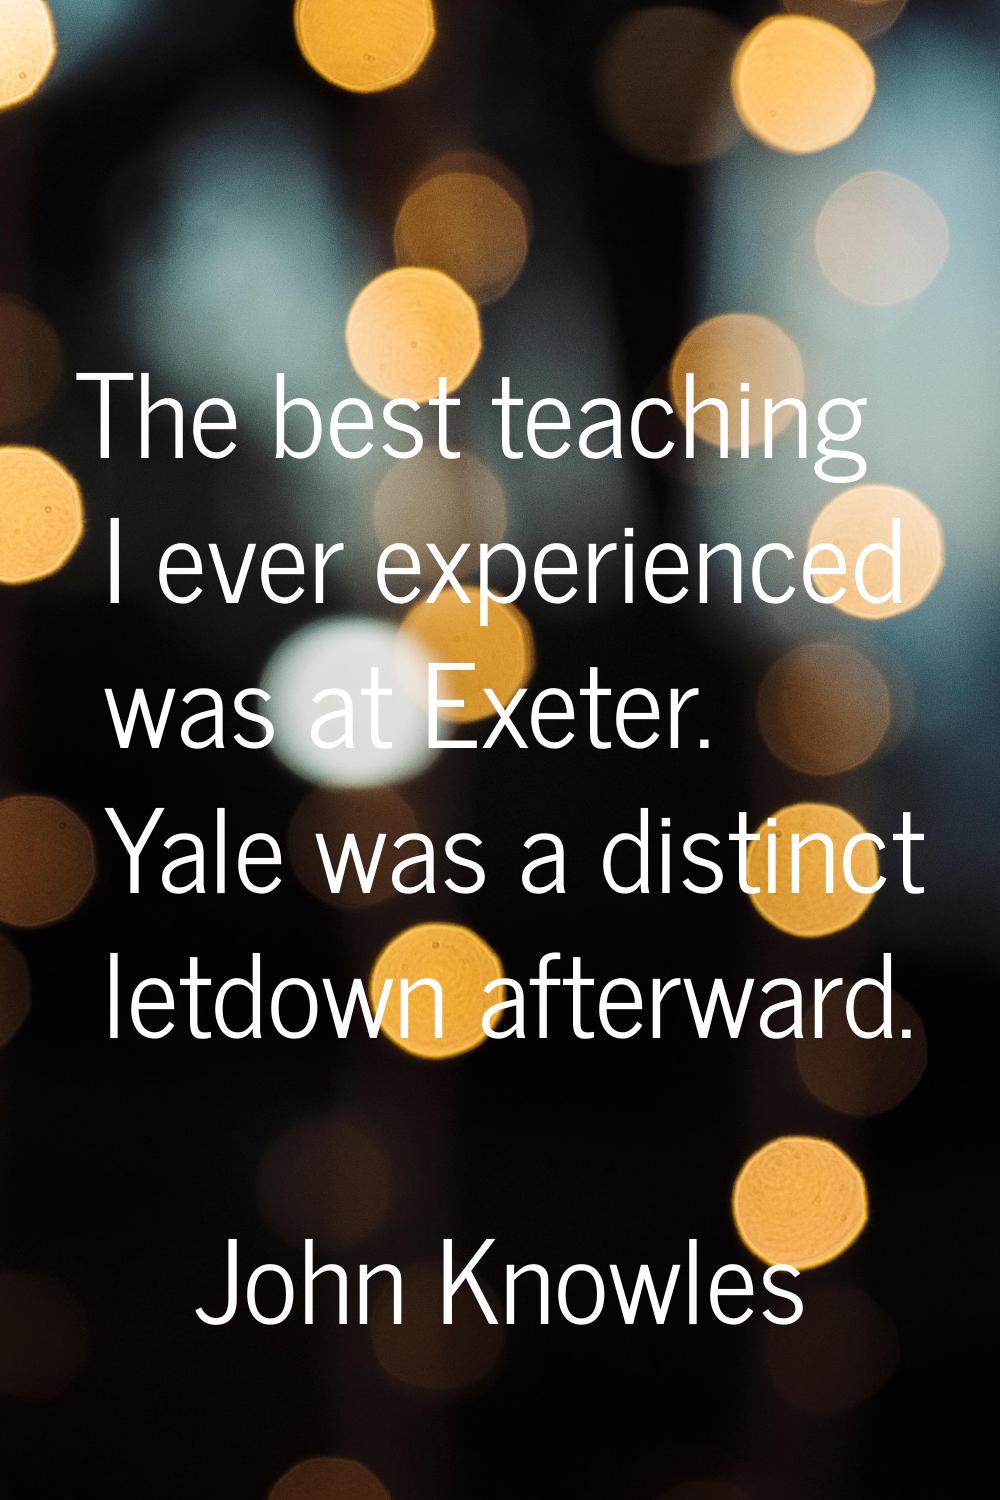 The best teaching I ever experienced was at Exeter. Yale was a distinct letdown afterward.